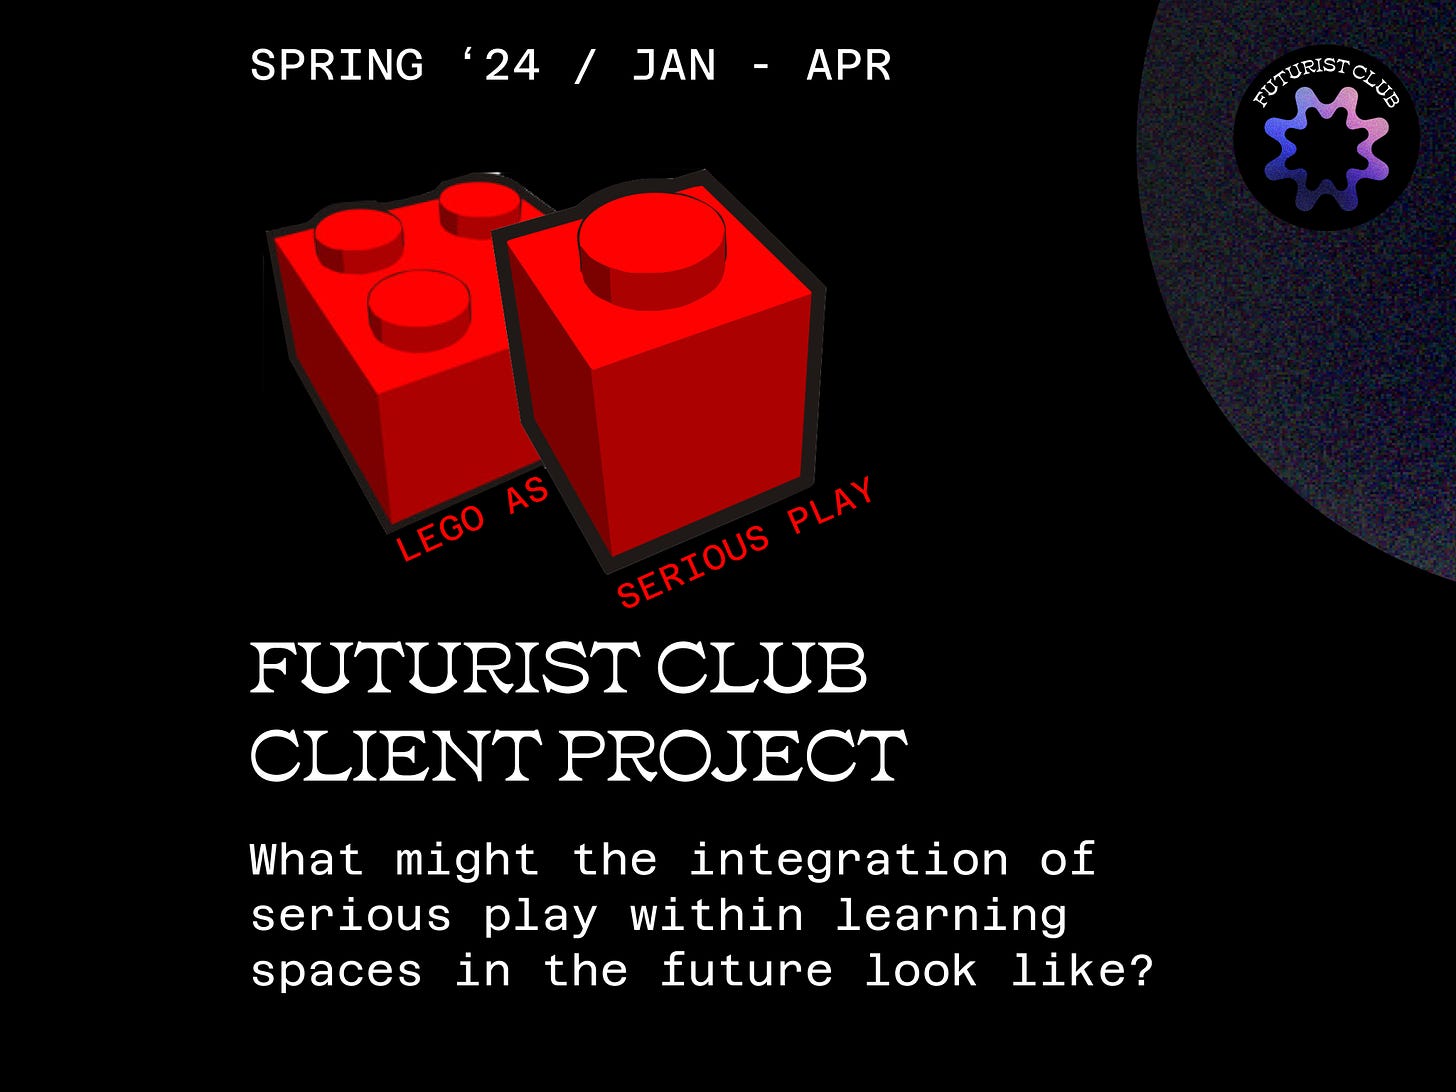 A promotional picture for the Futurist Club client project